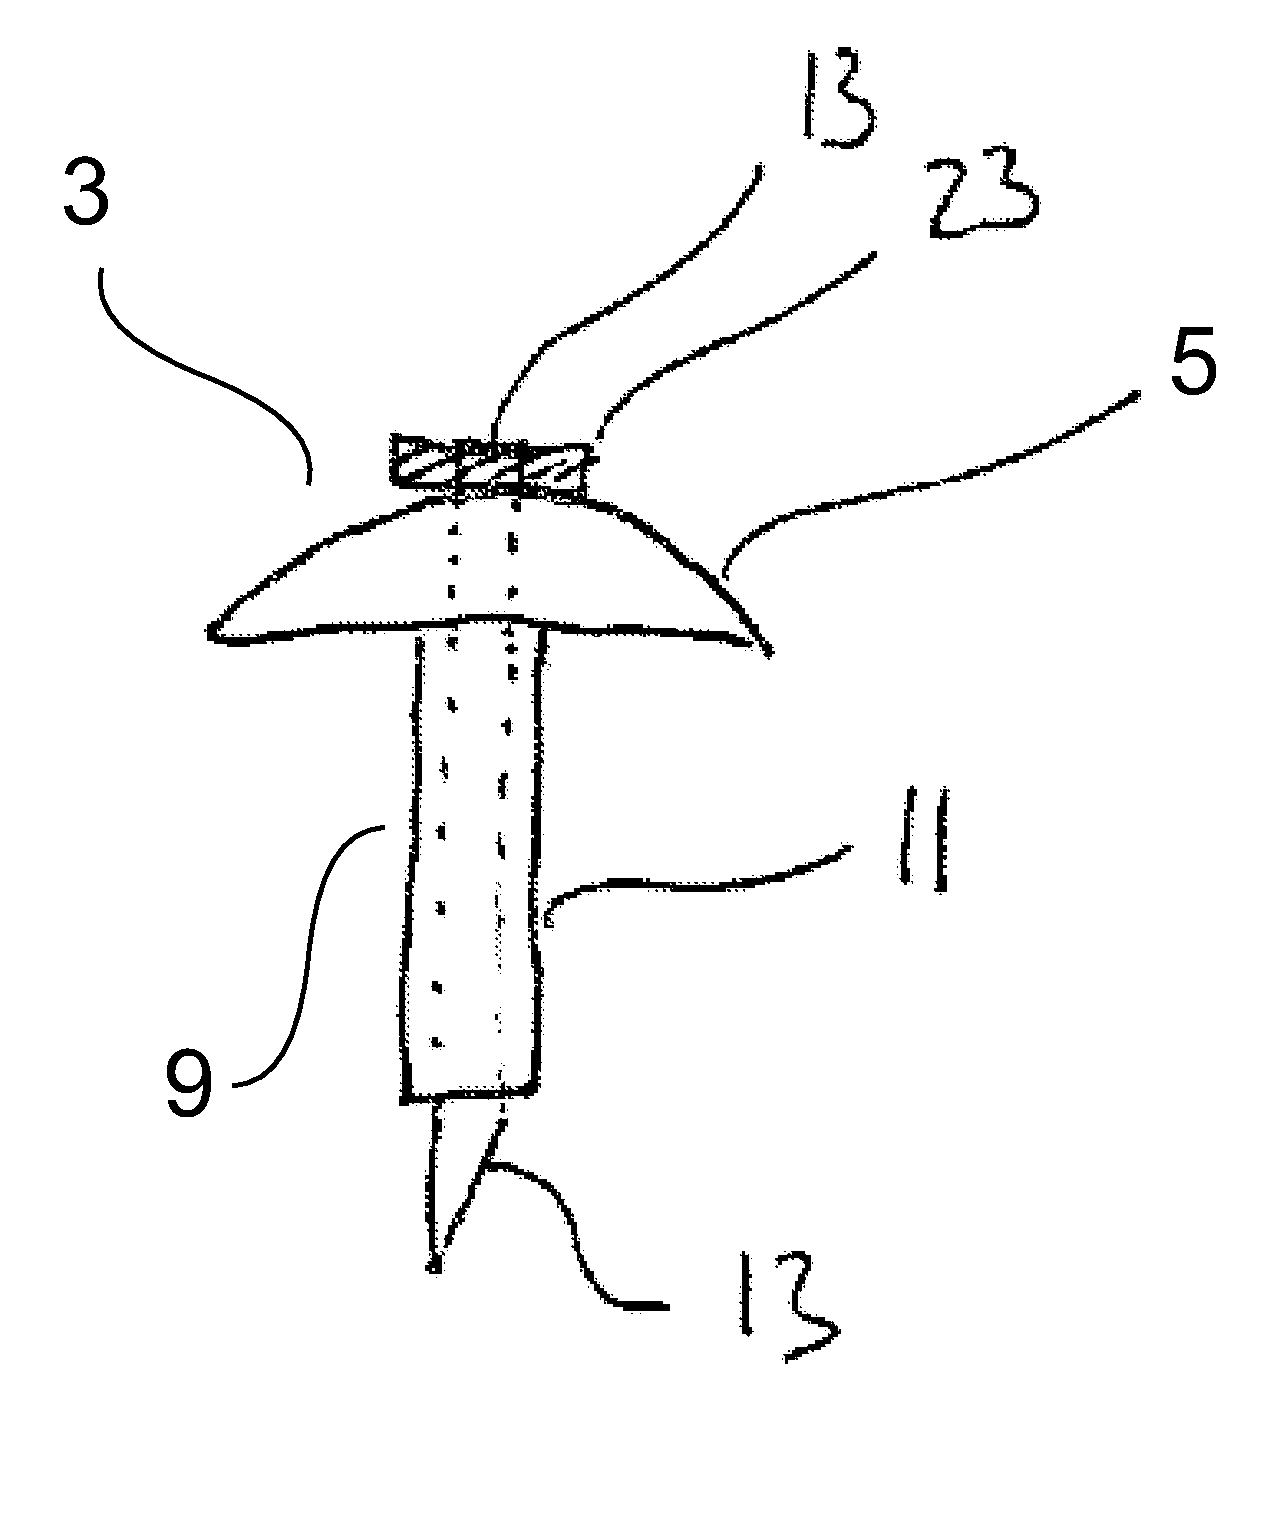 Insertion device with pivoting action